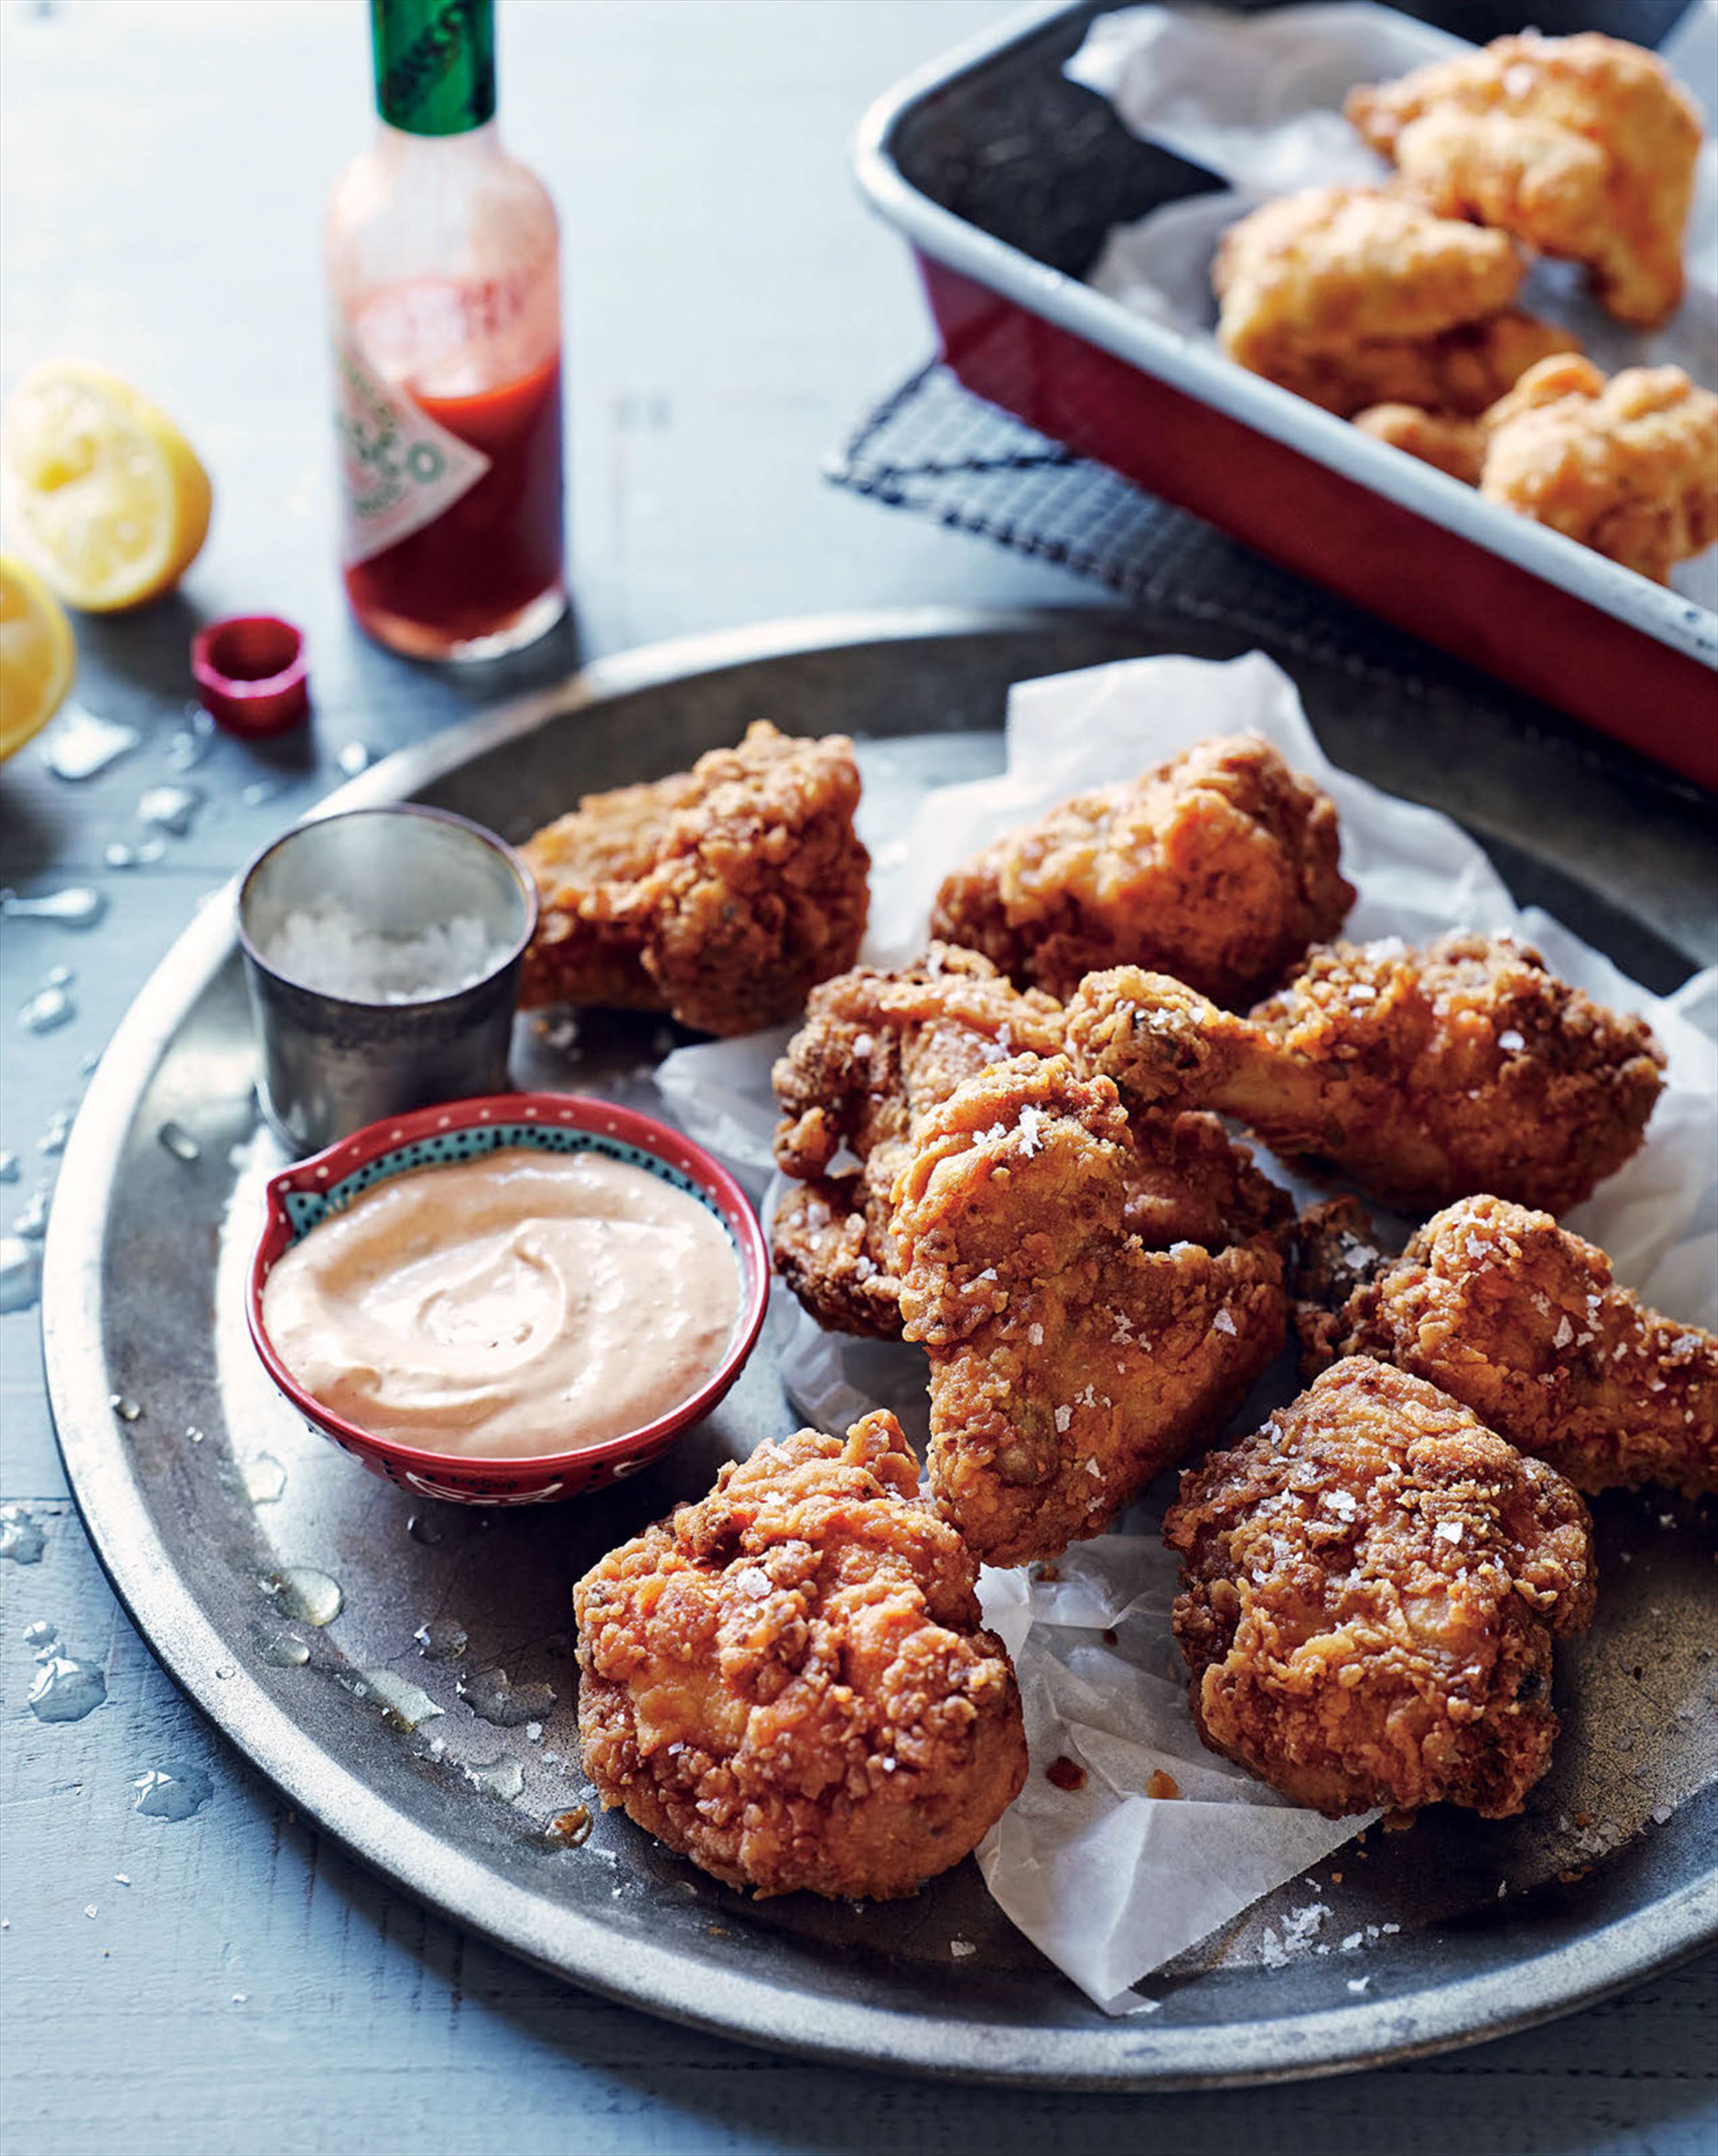 Fried chicken with chipotle mayo